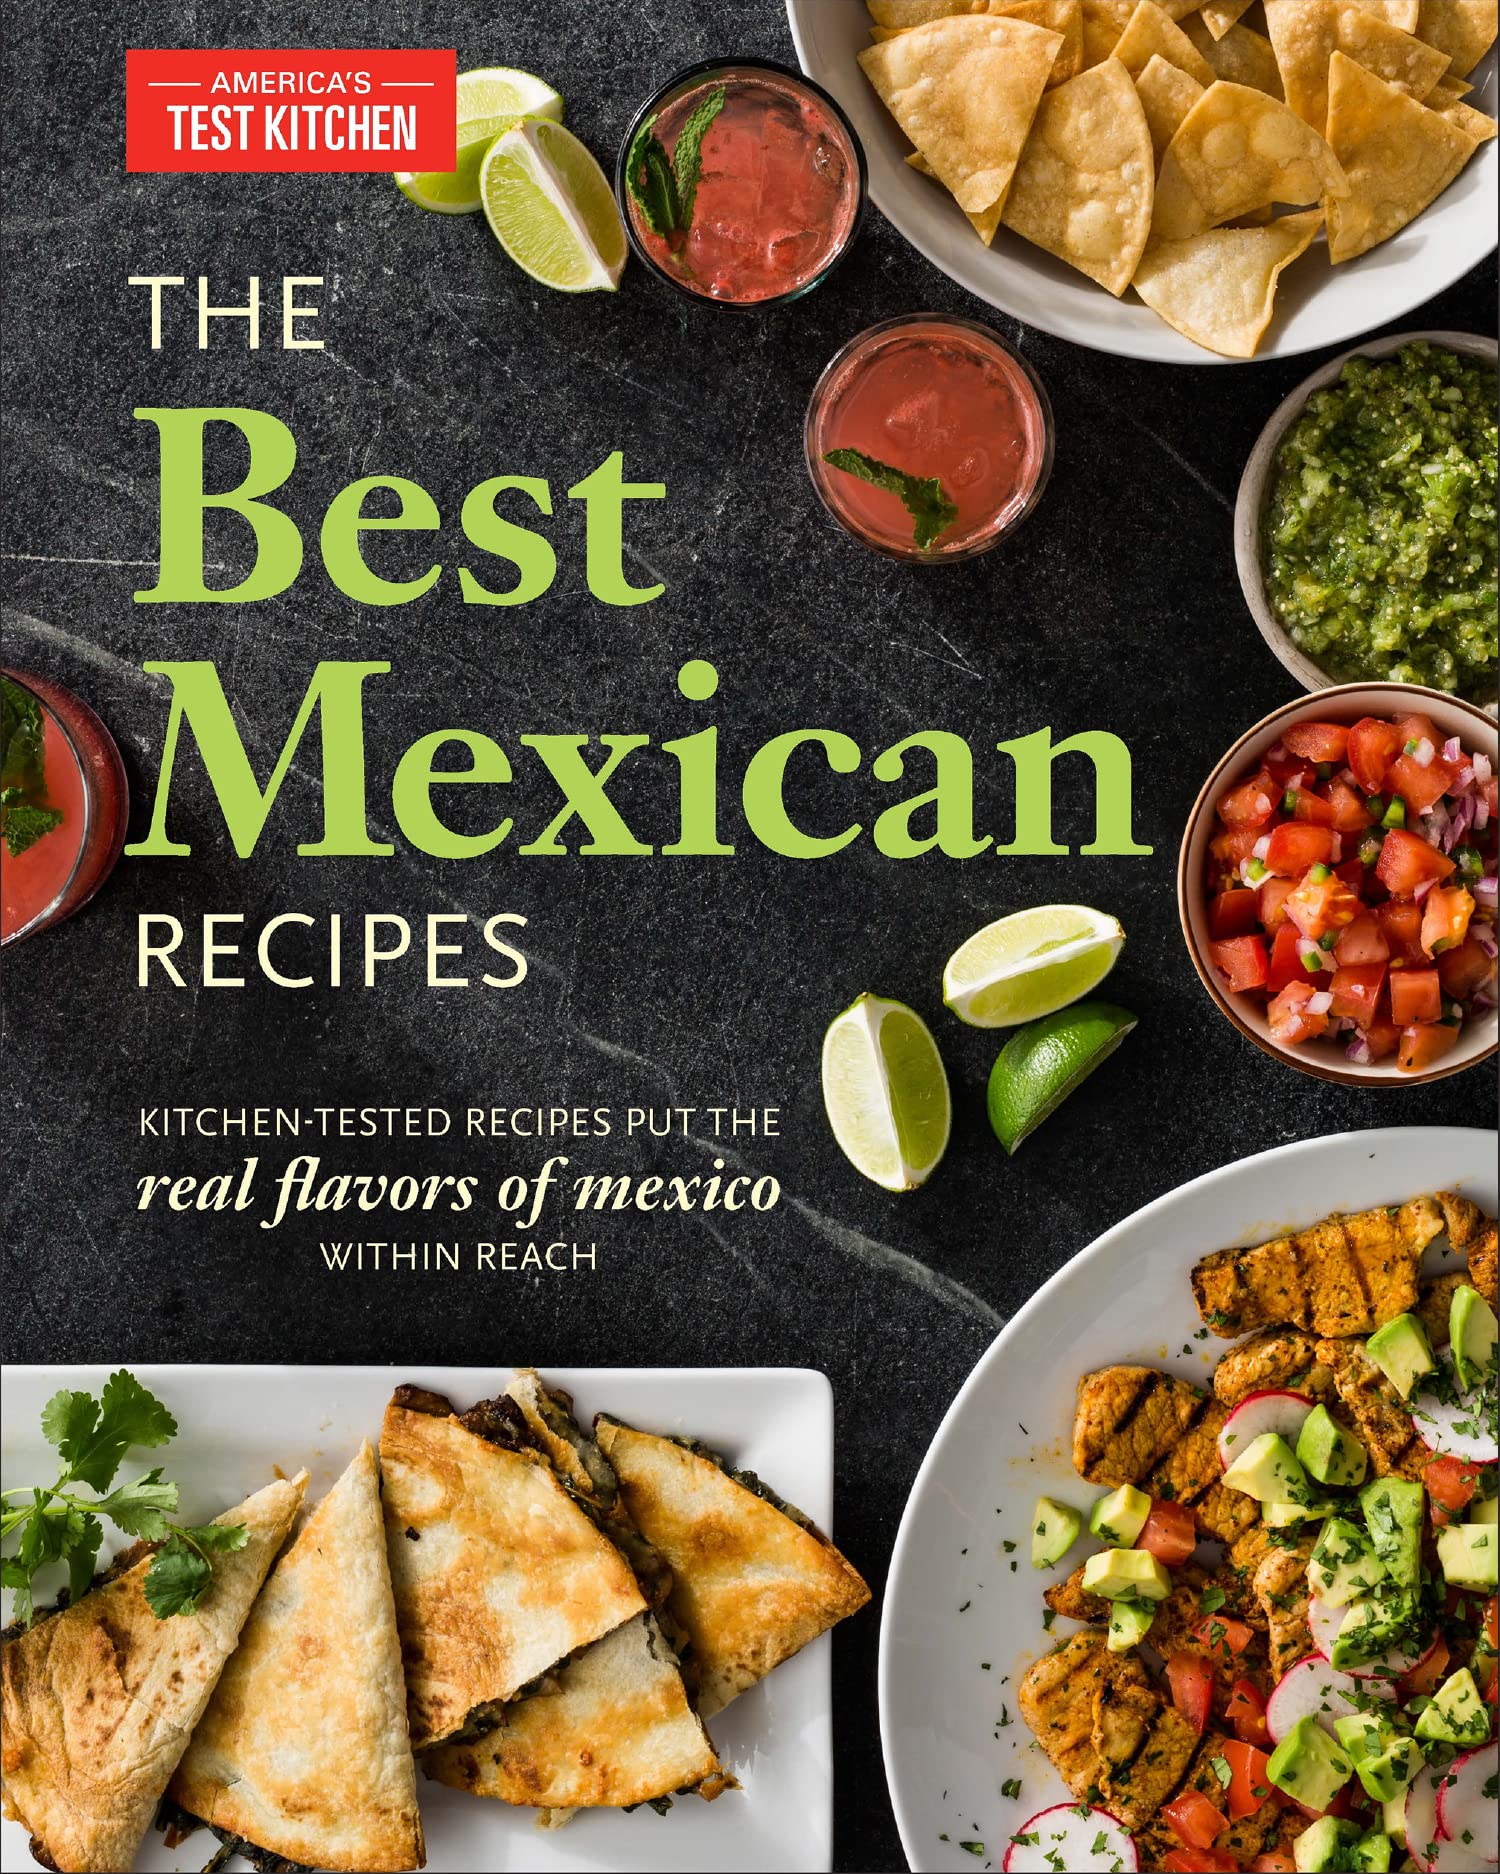 The Best Mexican Recipes | America's Test Kitchen